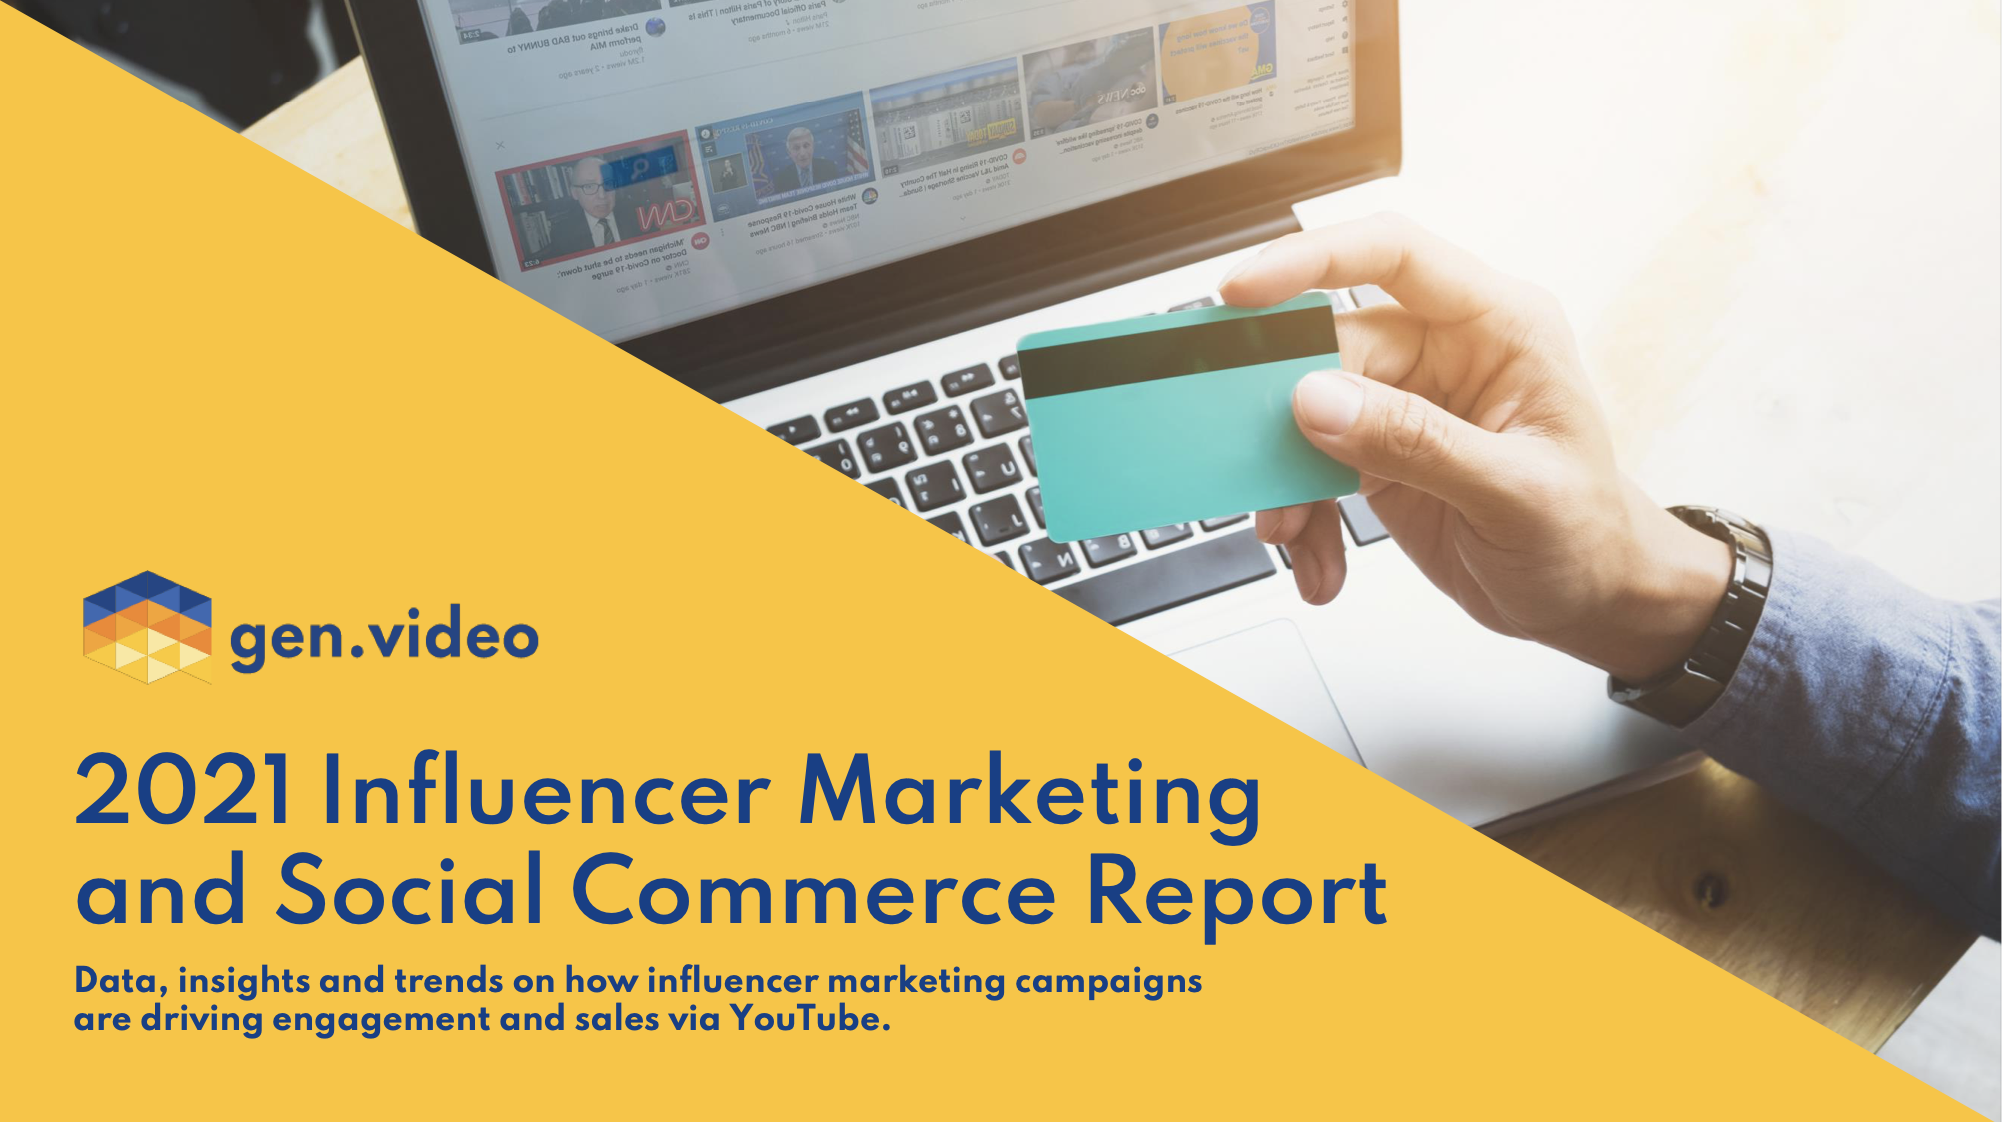 gen.video 2021 Influencer Marketing and Social Commerce Report